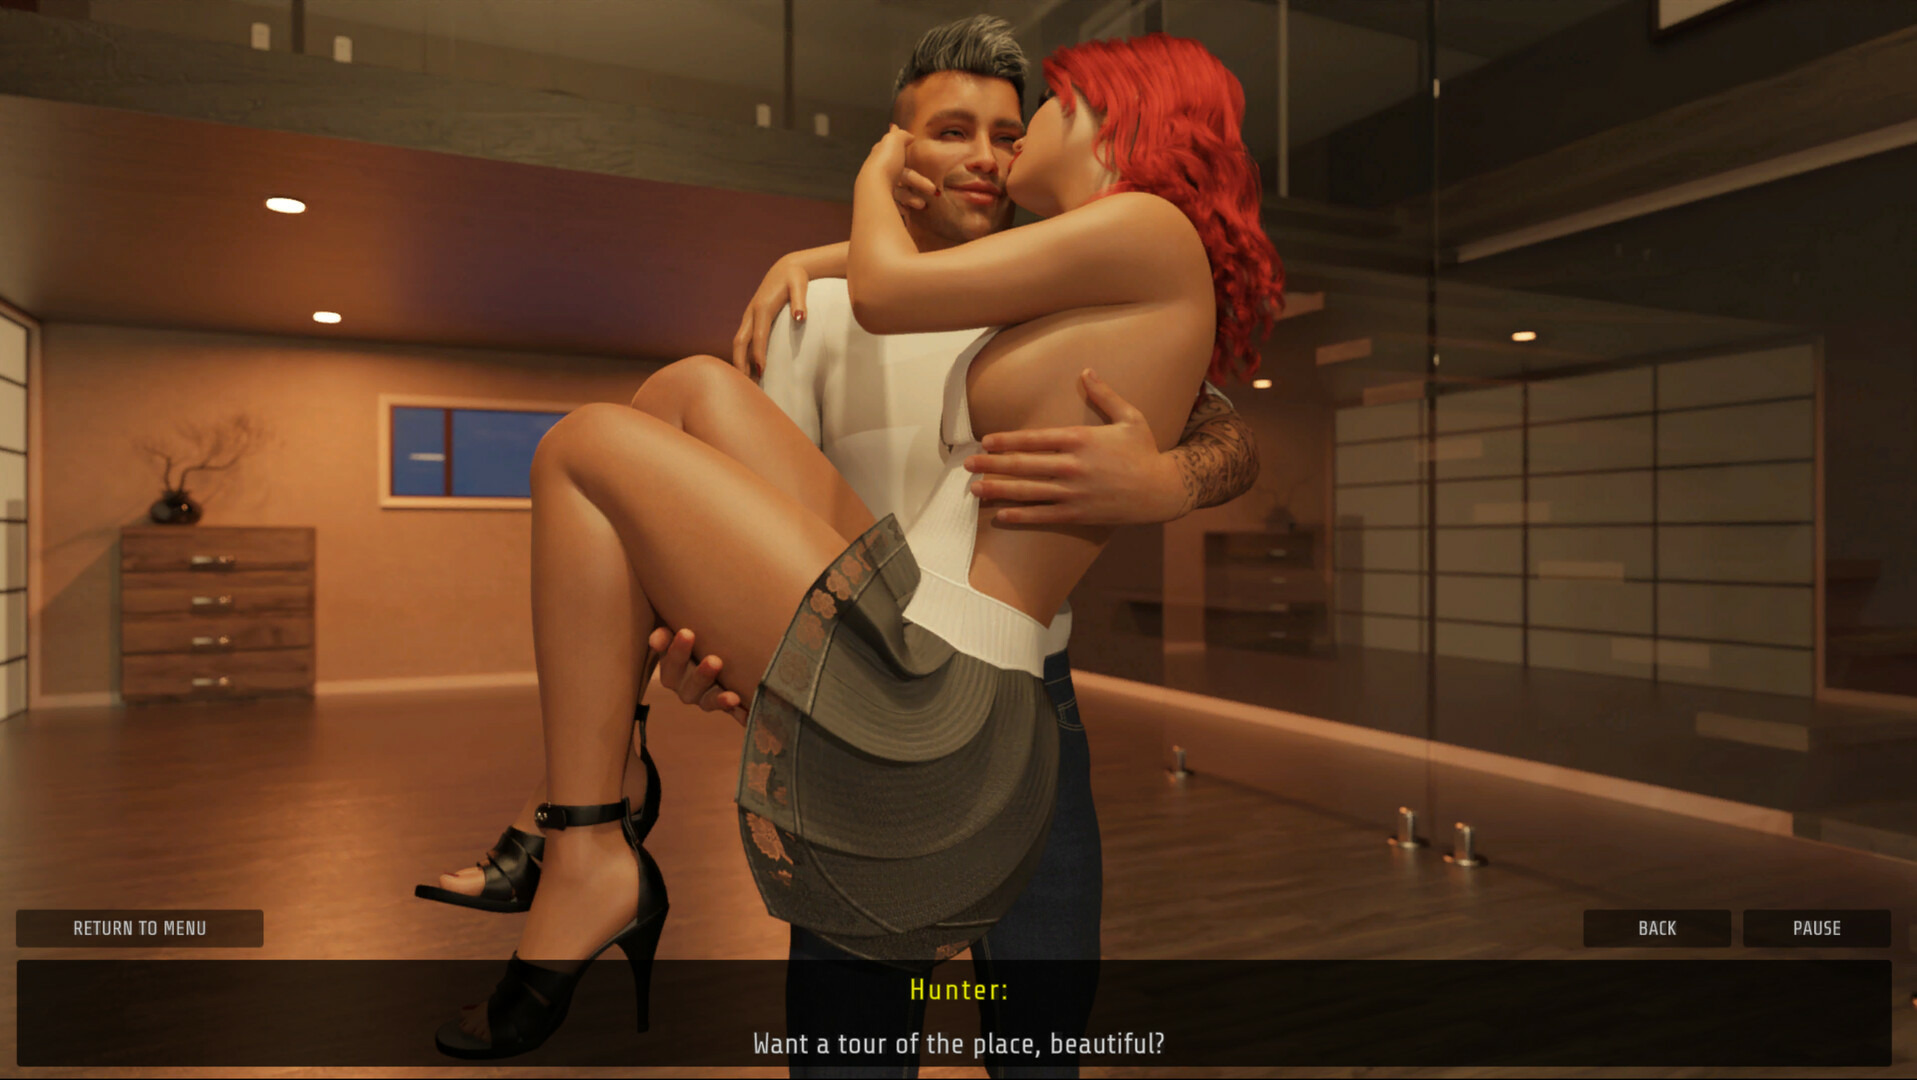 Sex Story - Ruby and Hunter - Episode 2 Steam CD Key 1.92 $